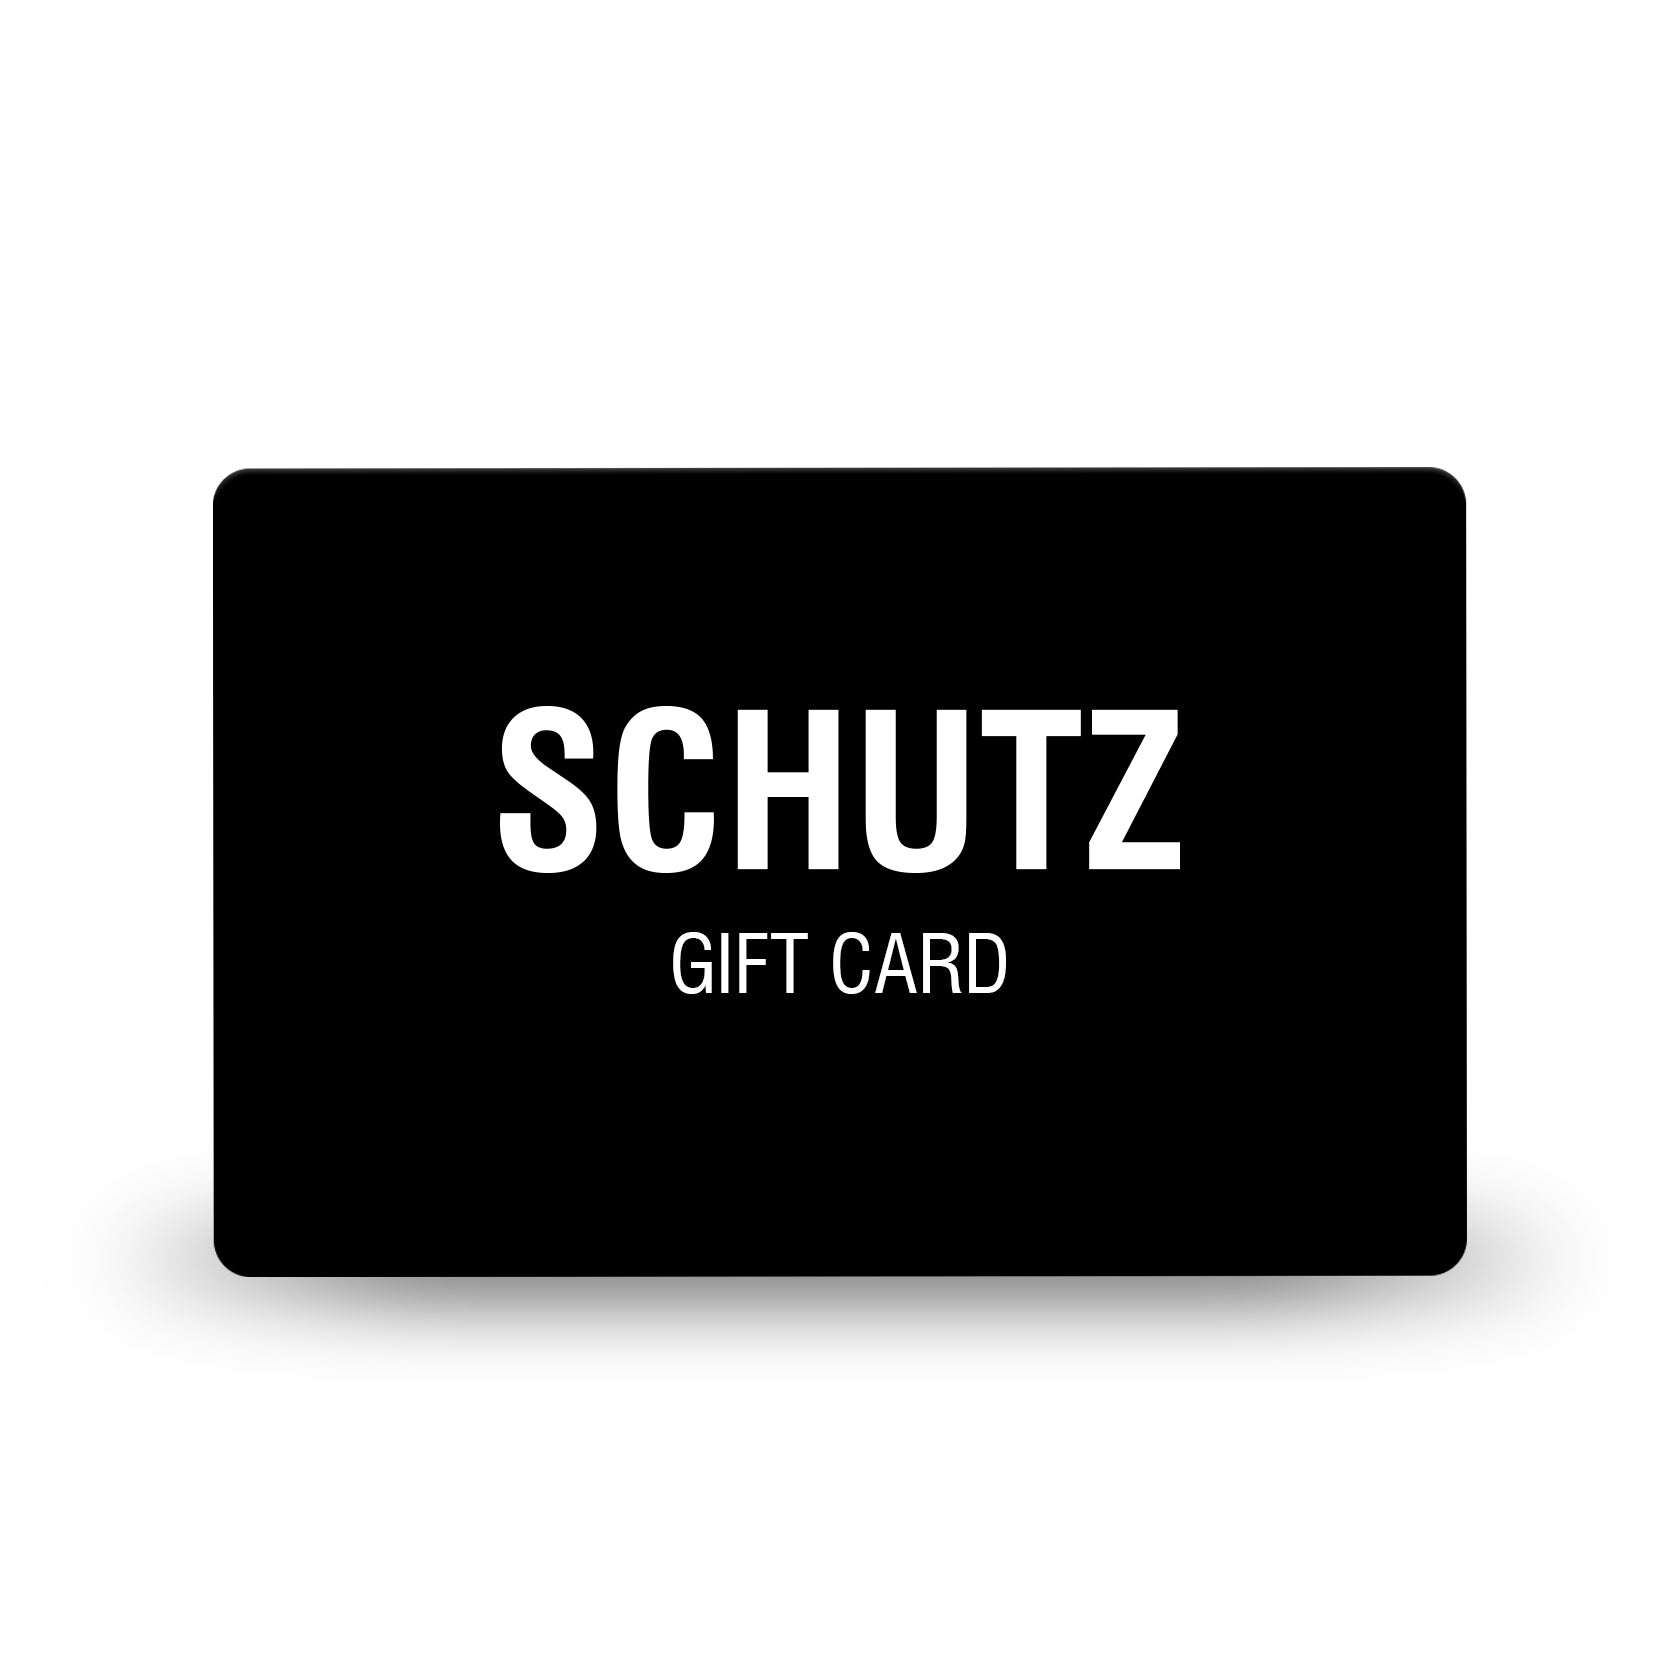 Gift card image with gift value